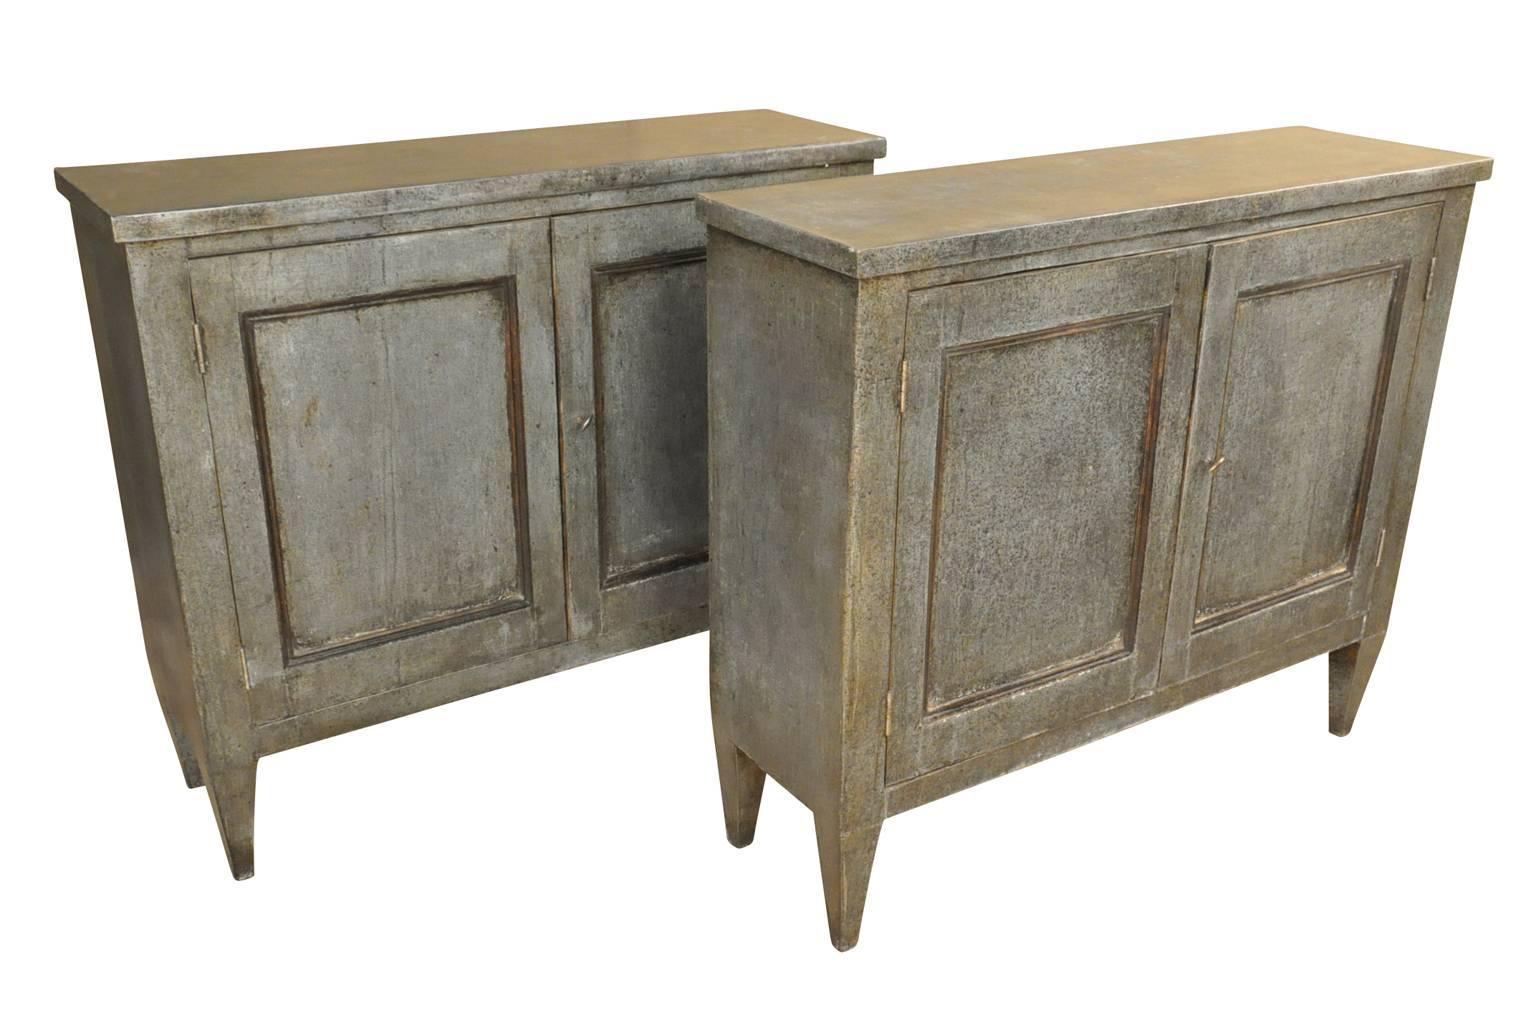 A fabulous pair of 19th century two-door buffets from the Catalan region of Spain. The buffets are wonderfully clad in zinc. Their minimalist design, along with the zinc cladding lends these pieces a very modern feel. The buffets may be sold as a